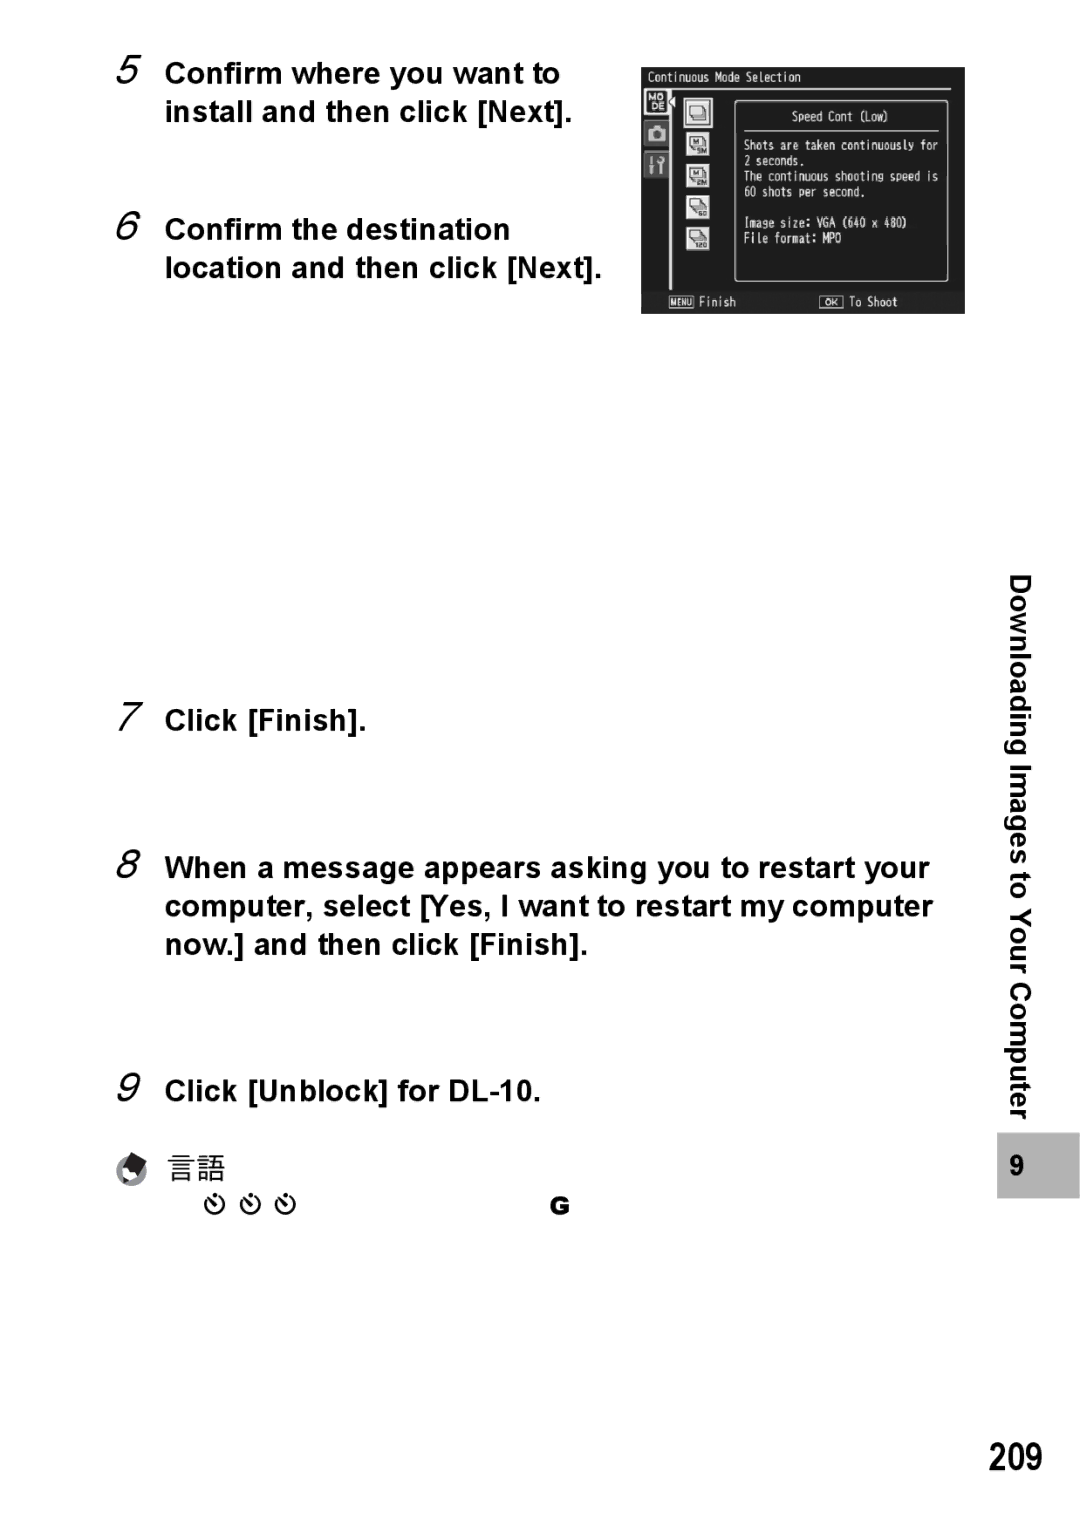 Samsung CX2 manual 209, Confirm where you want to install and then click Next, Click Finish, Click Unblock for DL-10 